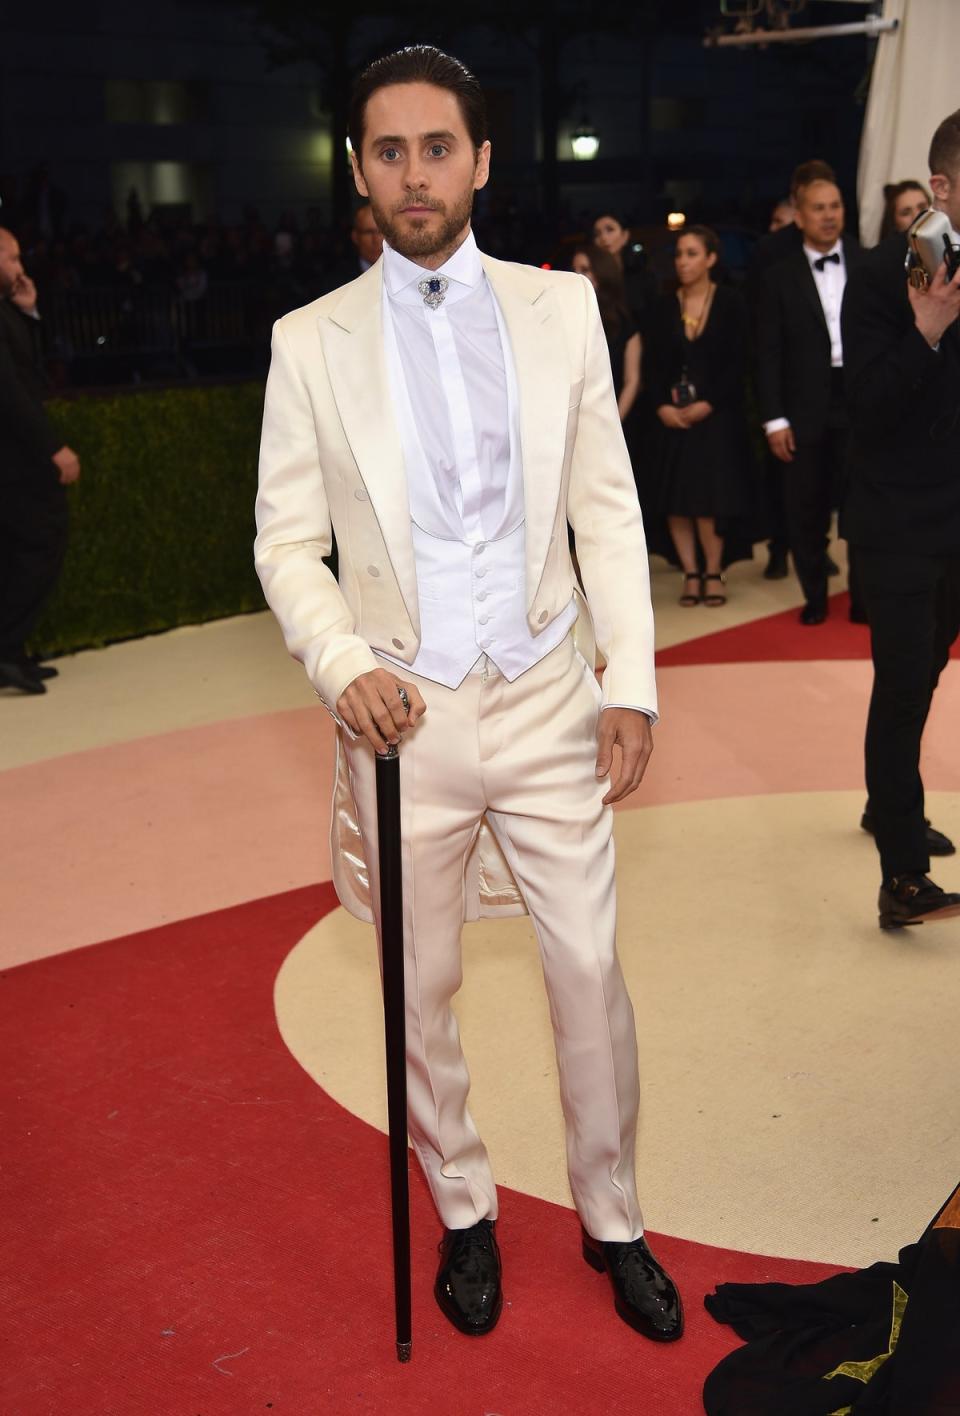 Jared Leto at the Met Gala 2016 (Getty Images)